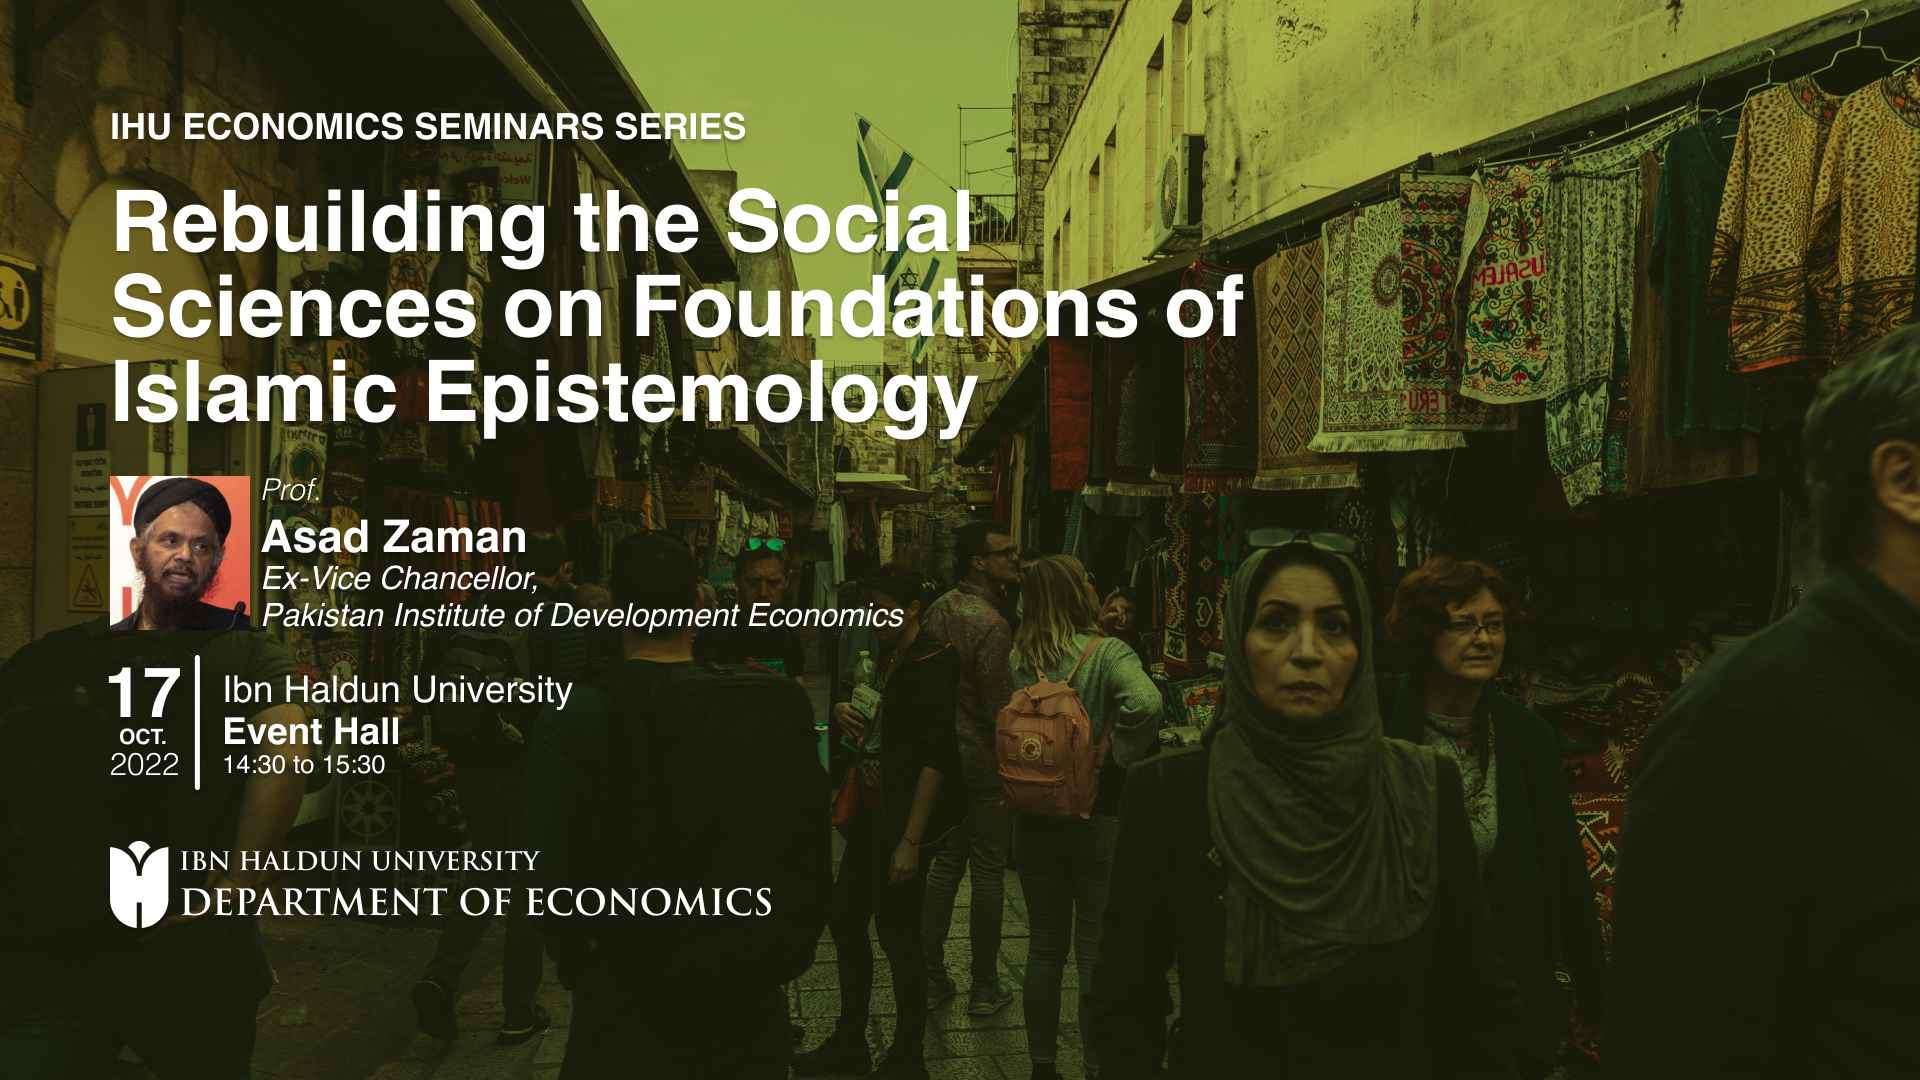 Rebuilding the Social Sciences on Foundations of Islamic Epistemology